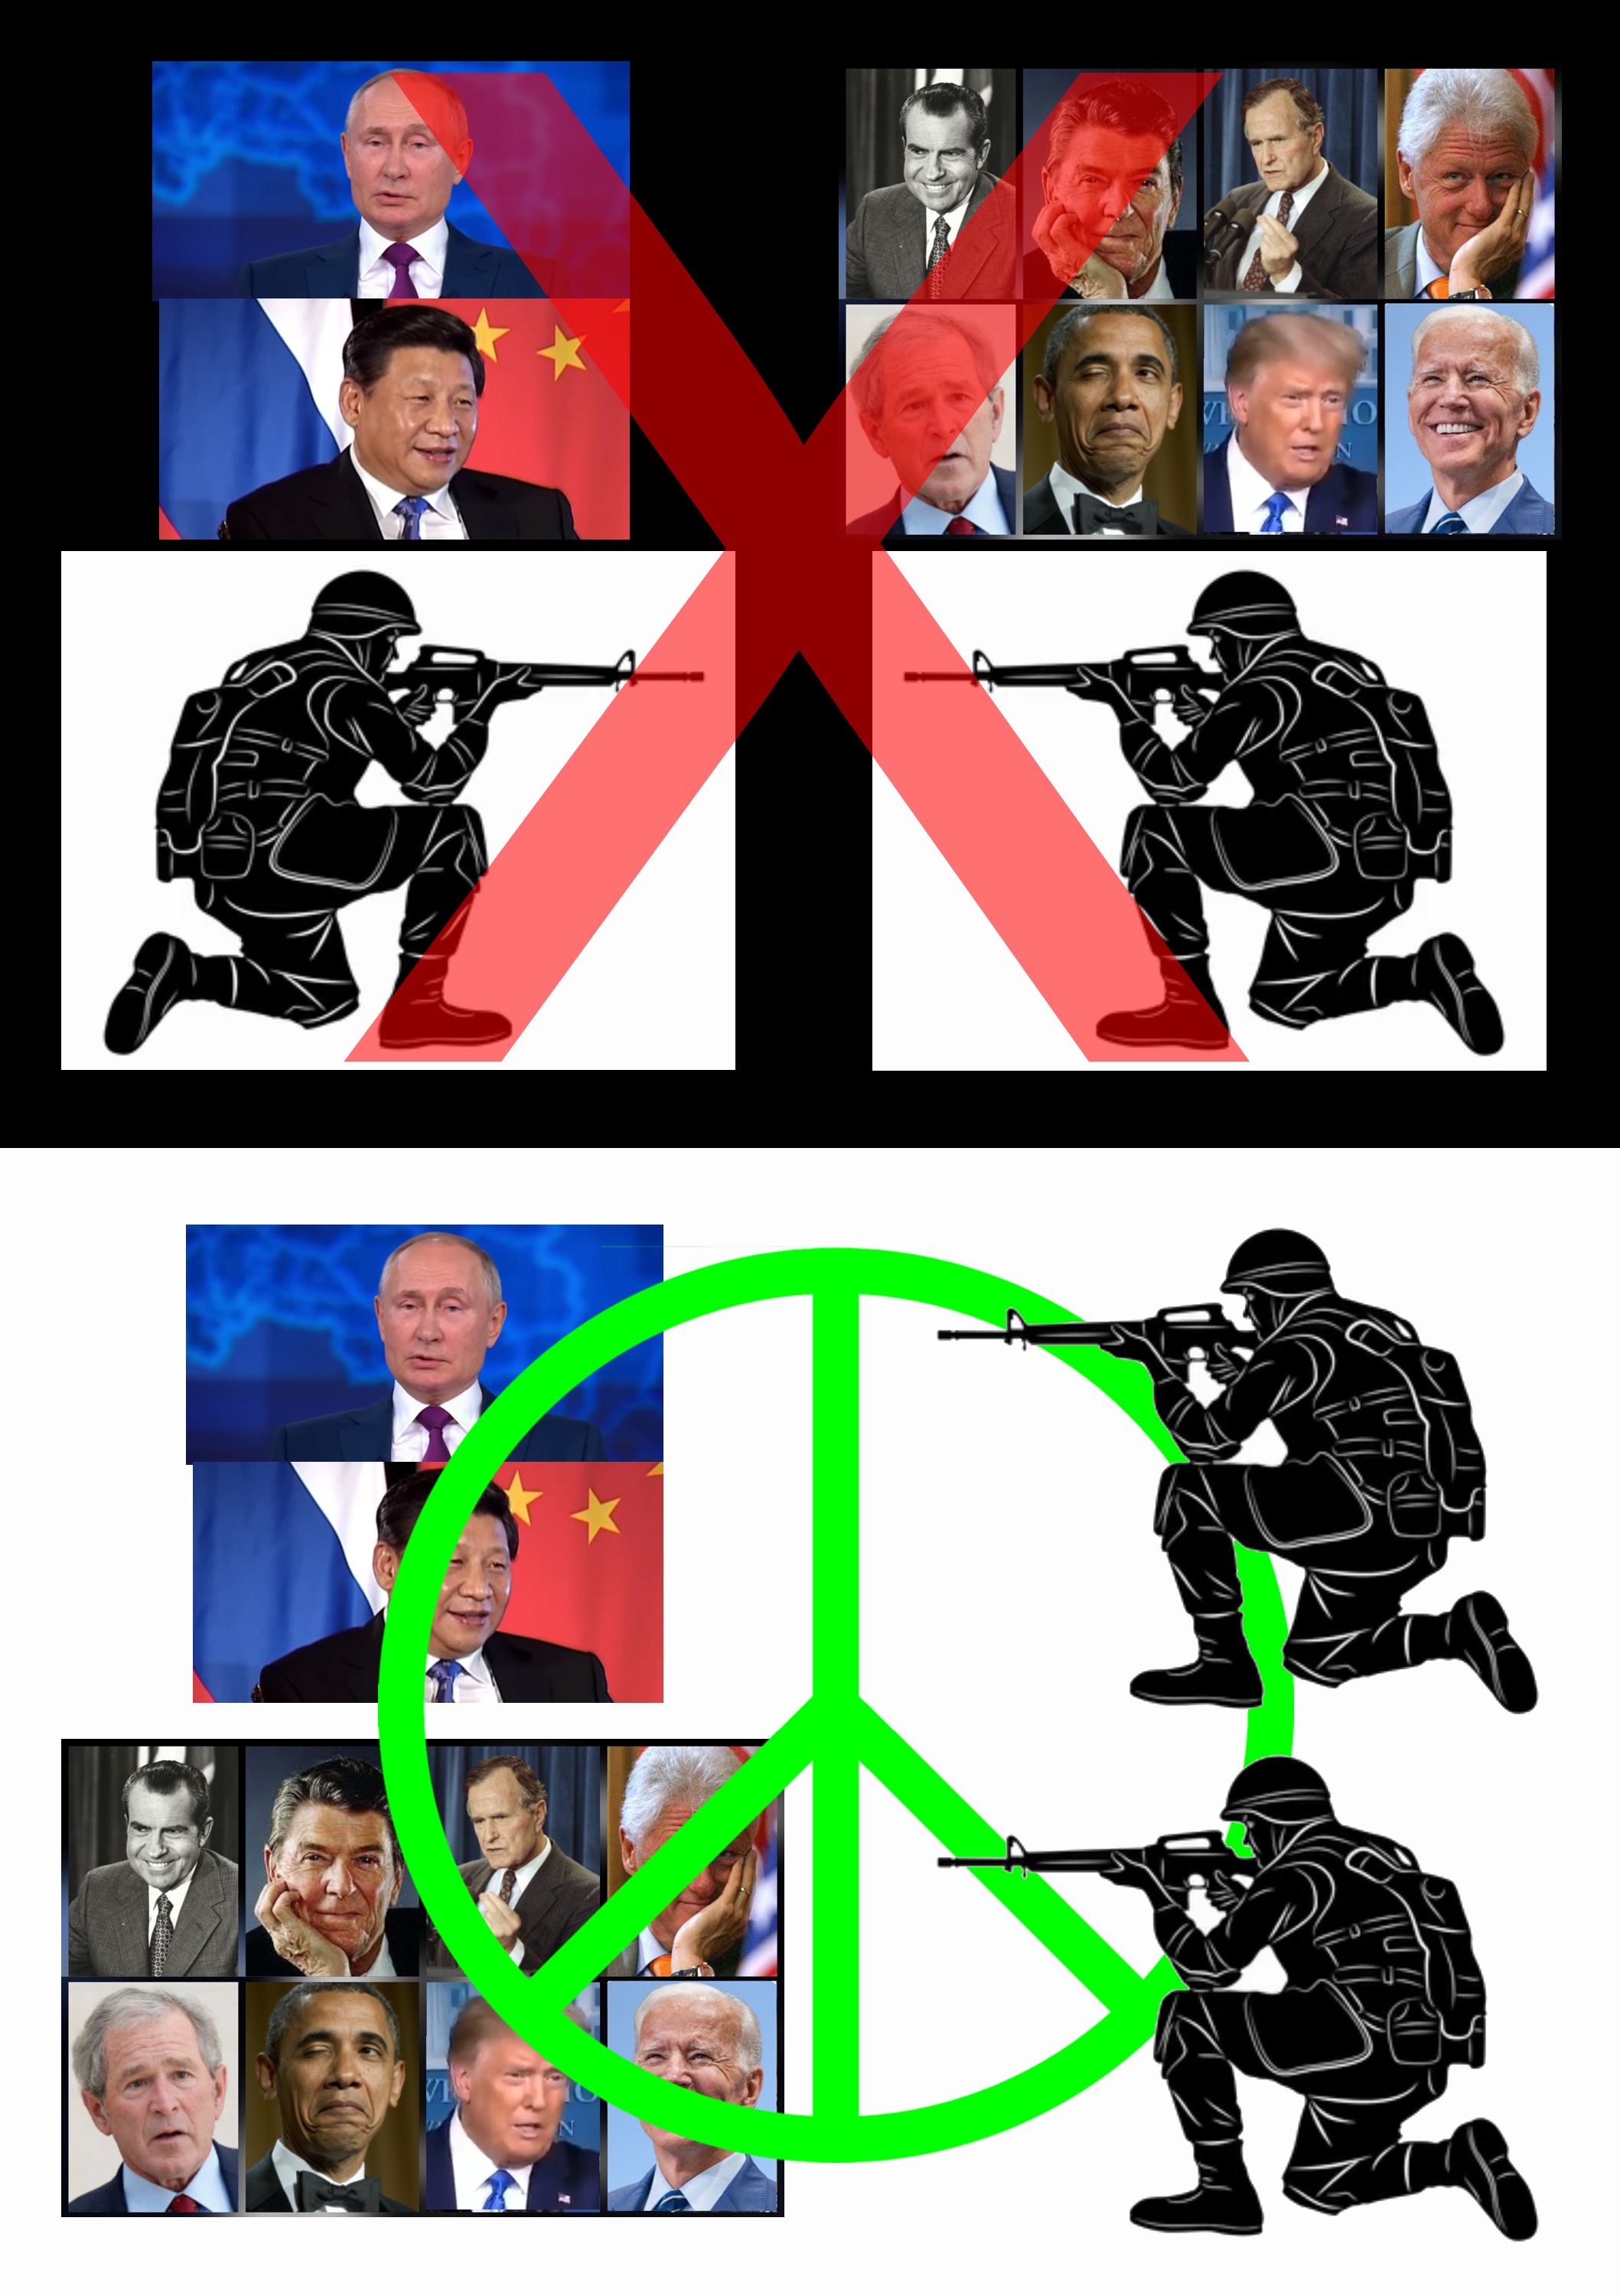 Soldiers on both sides (liberal / authoritarian oligarchic systems) should not shoot each other.